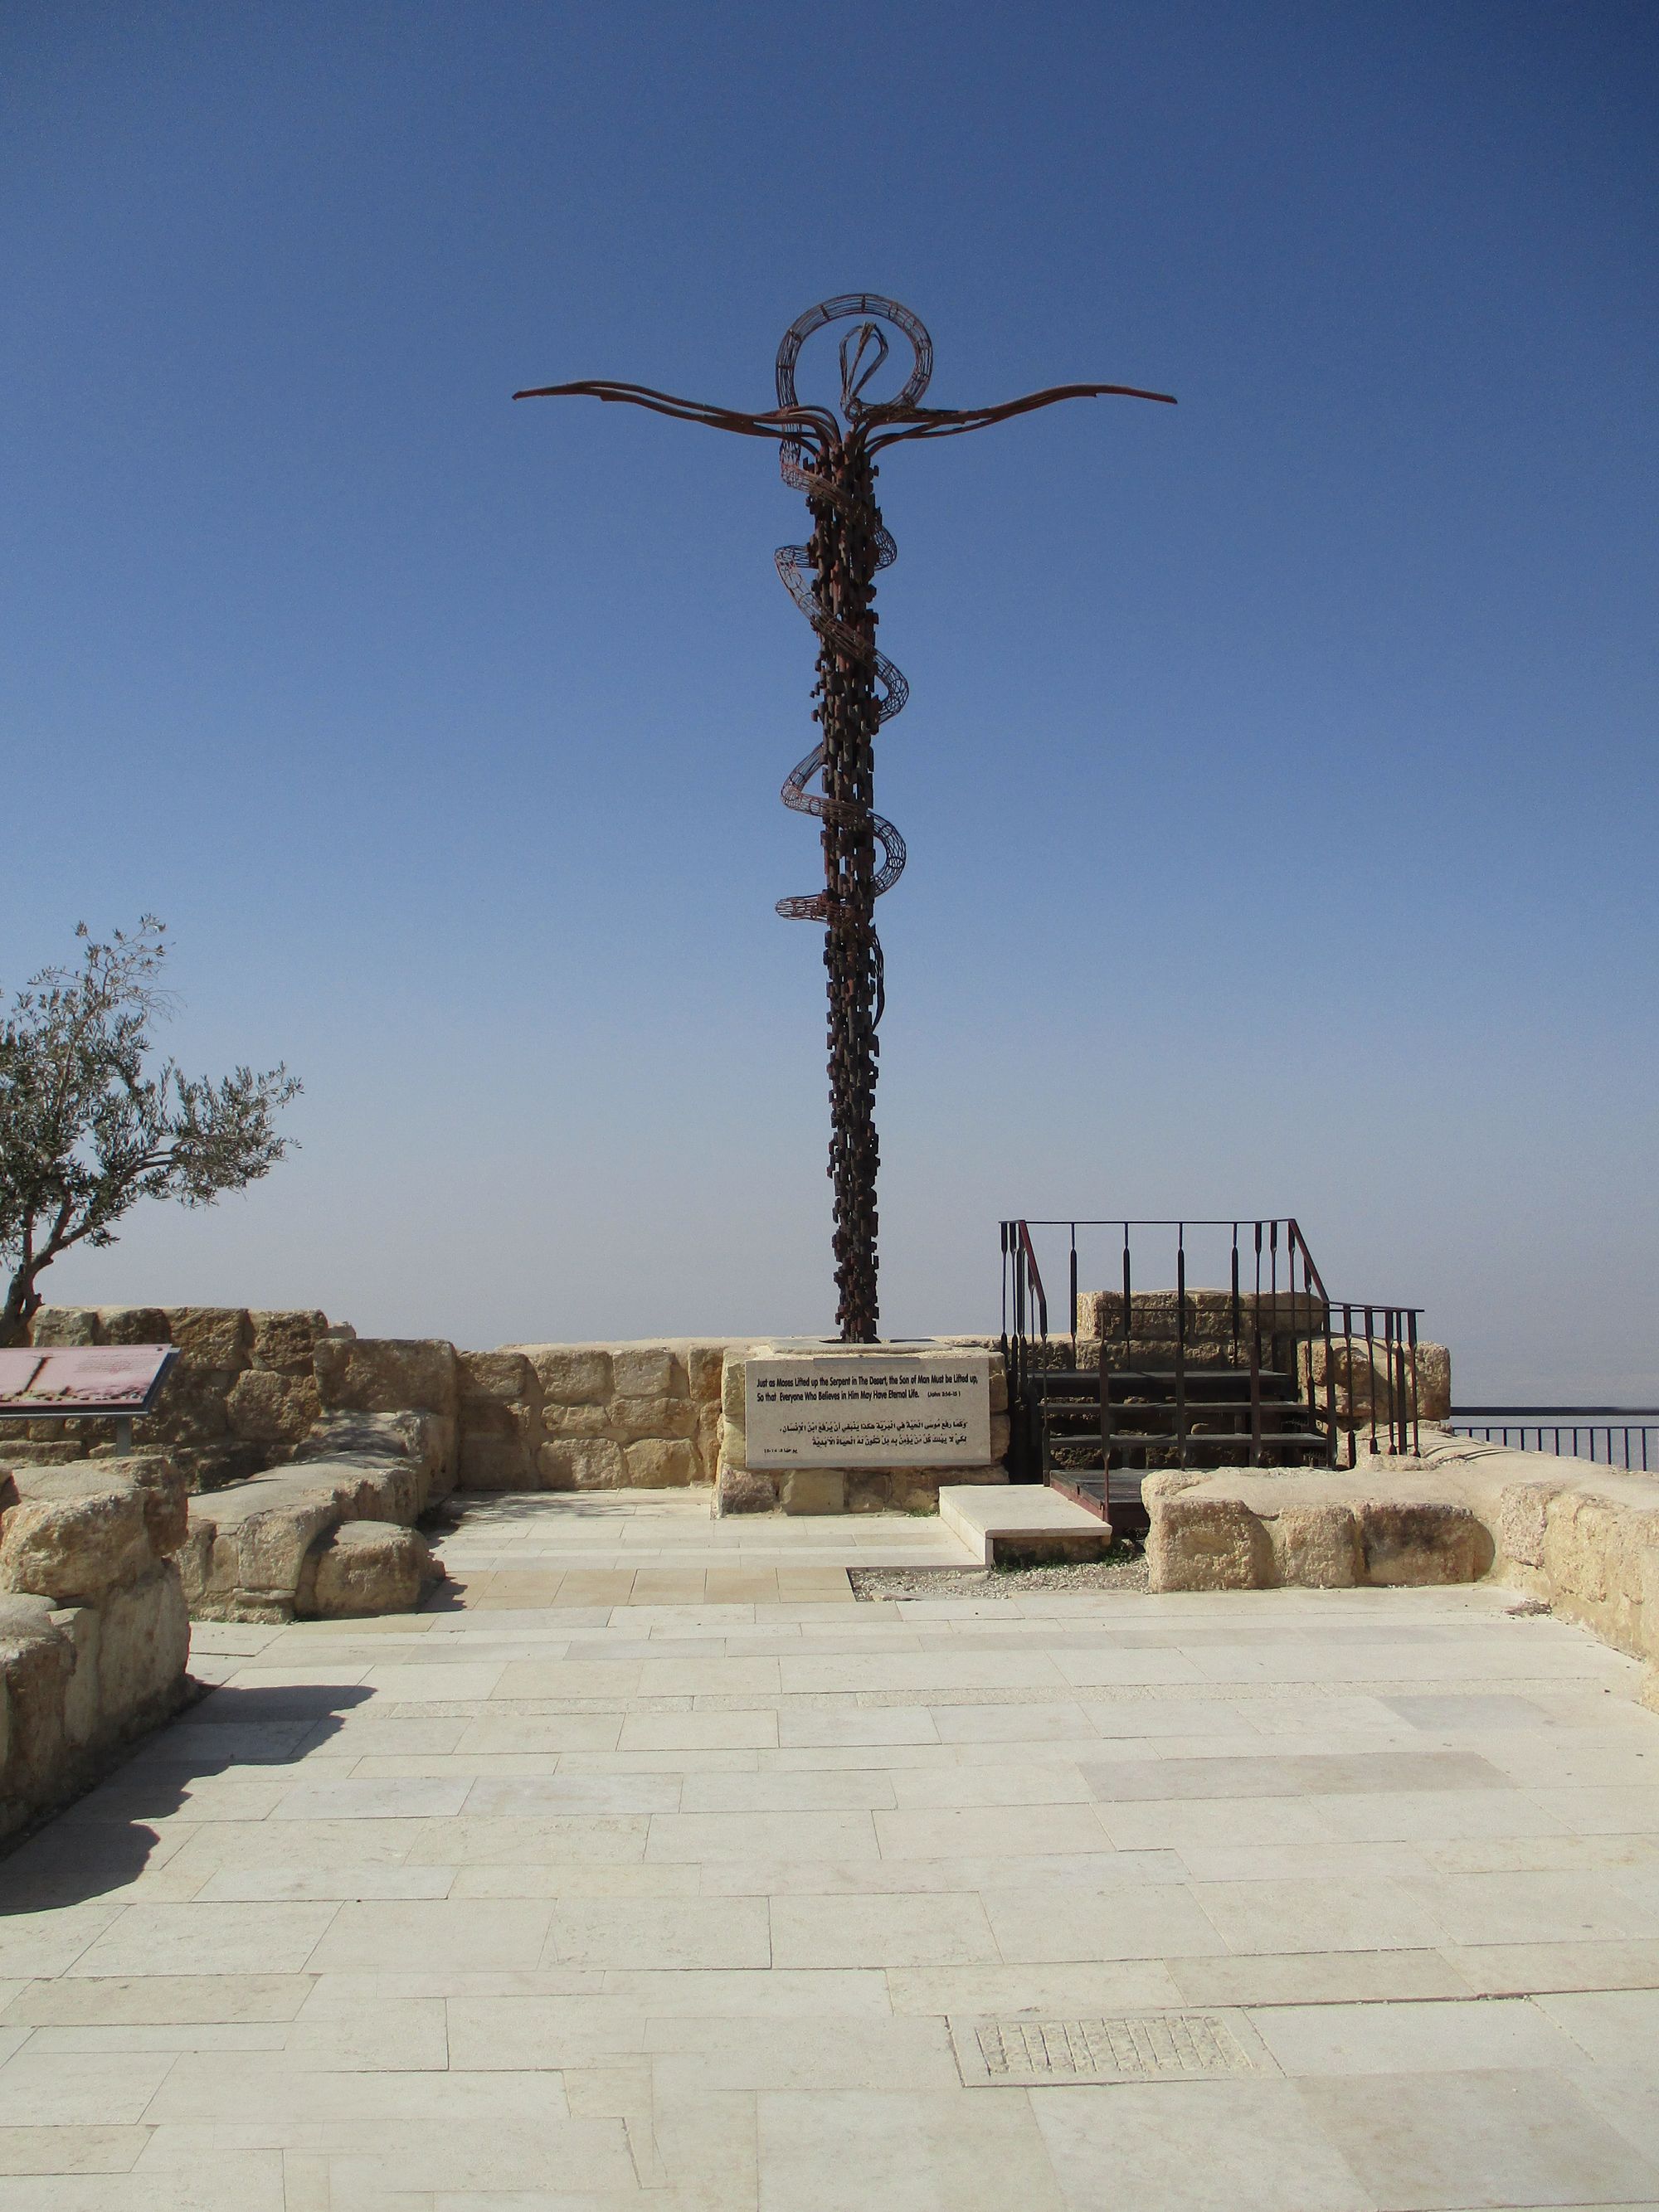 The Top of Mt. Nebo Where Moses Saw the Promised Land